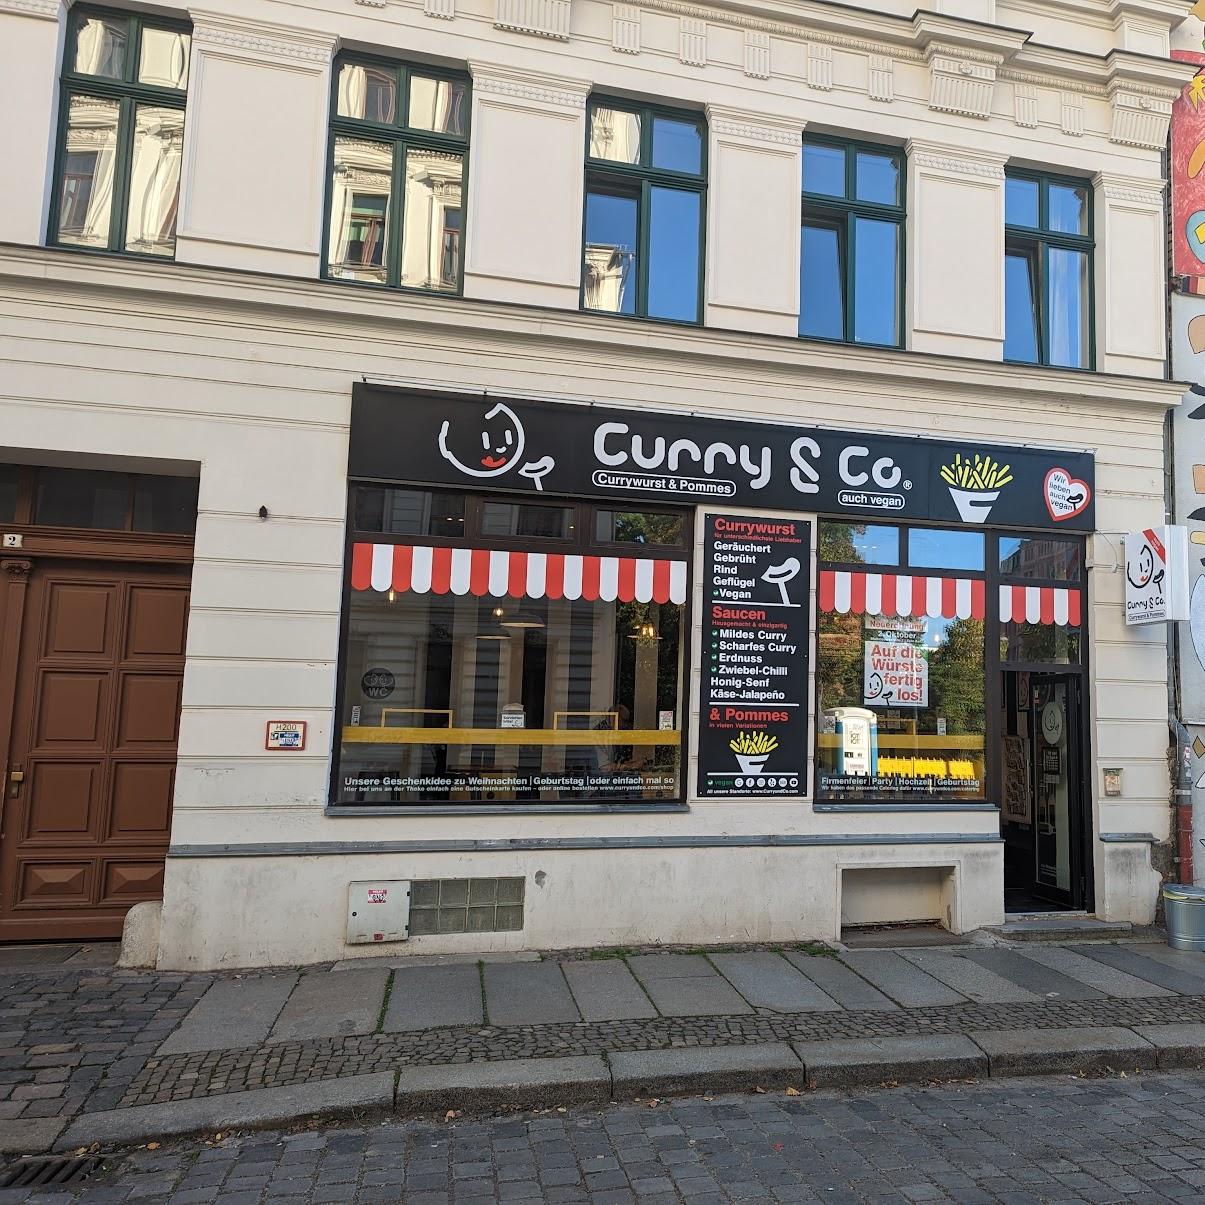 Restaurant "Curry & Co." in Leipzig